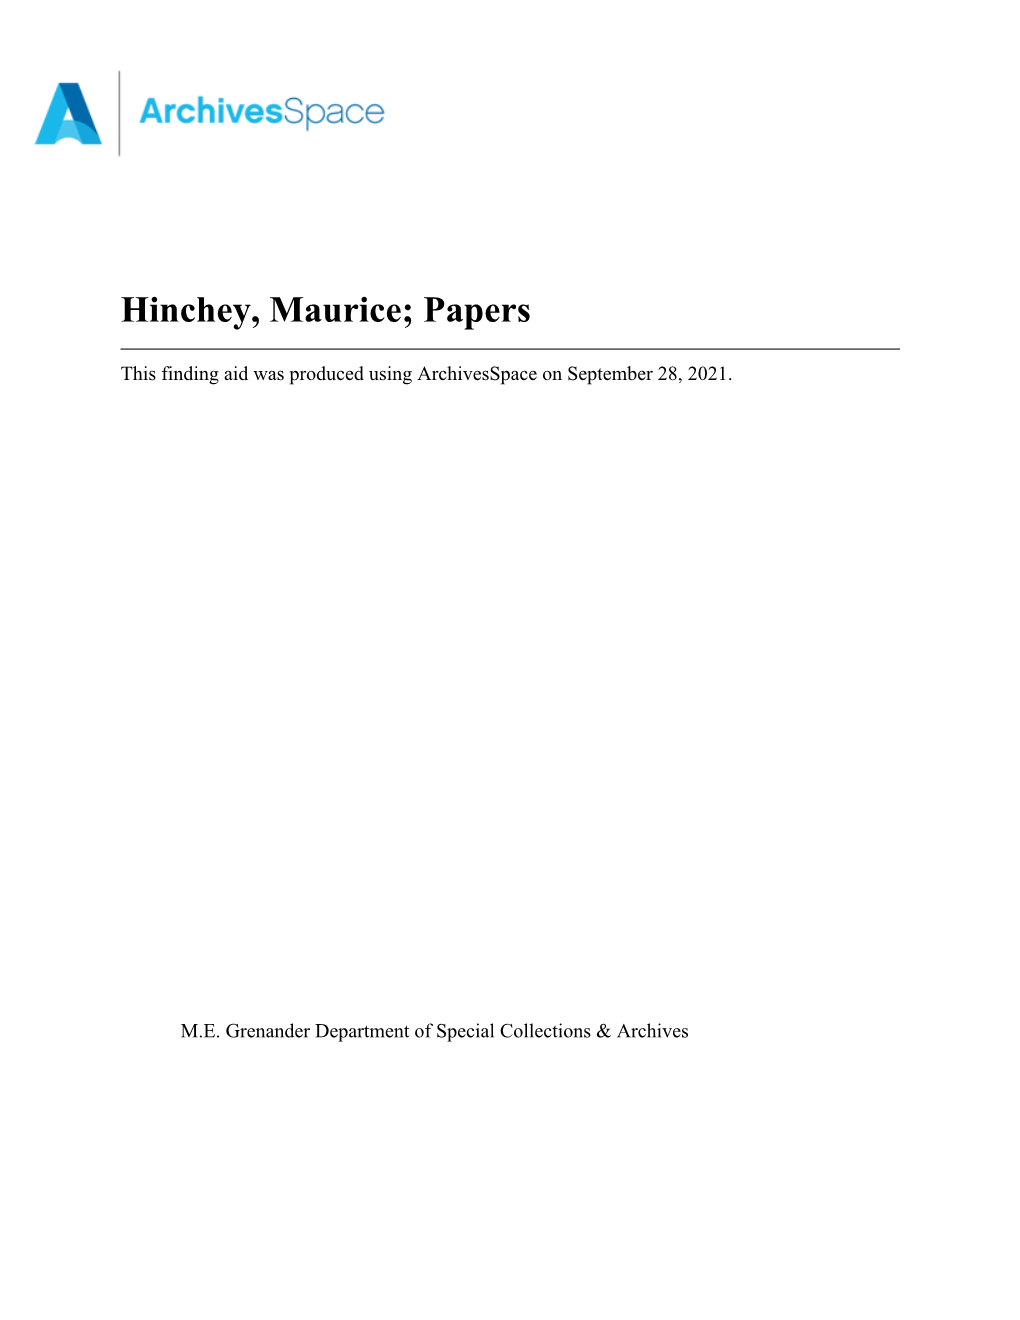 Hinchey, Maurice; Papers Apap335